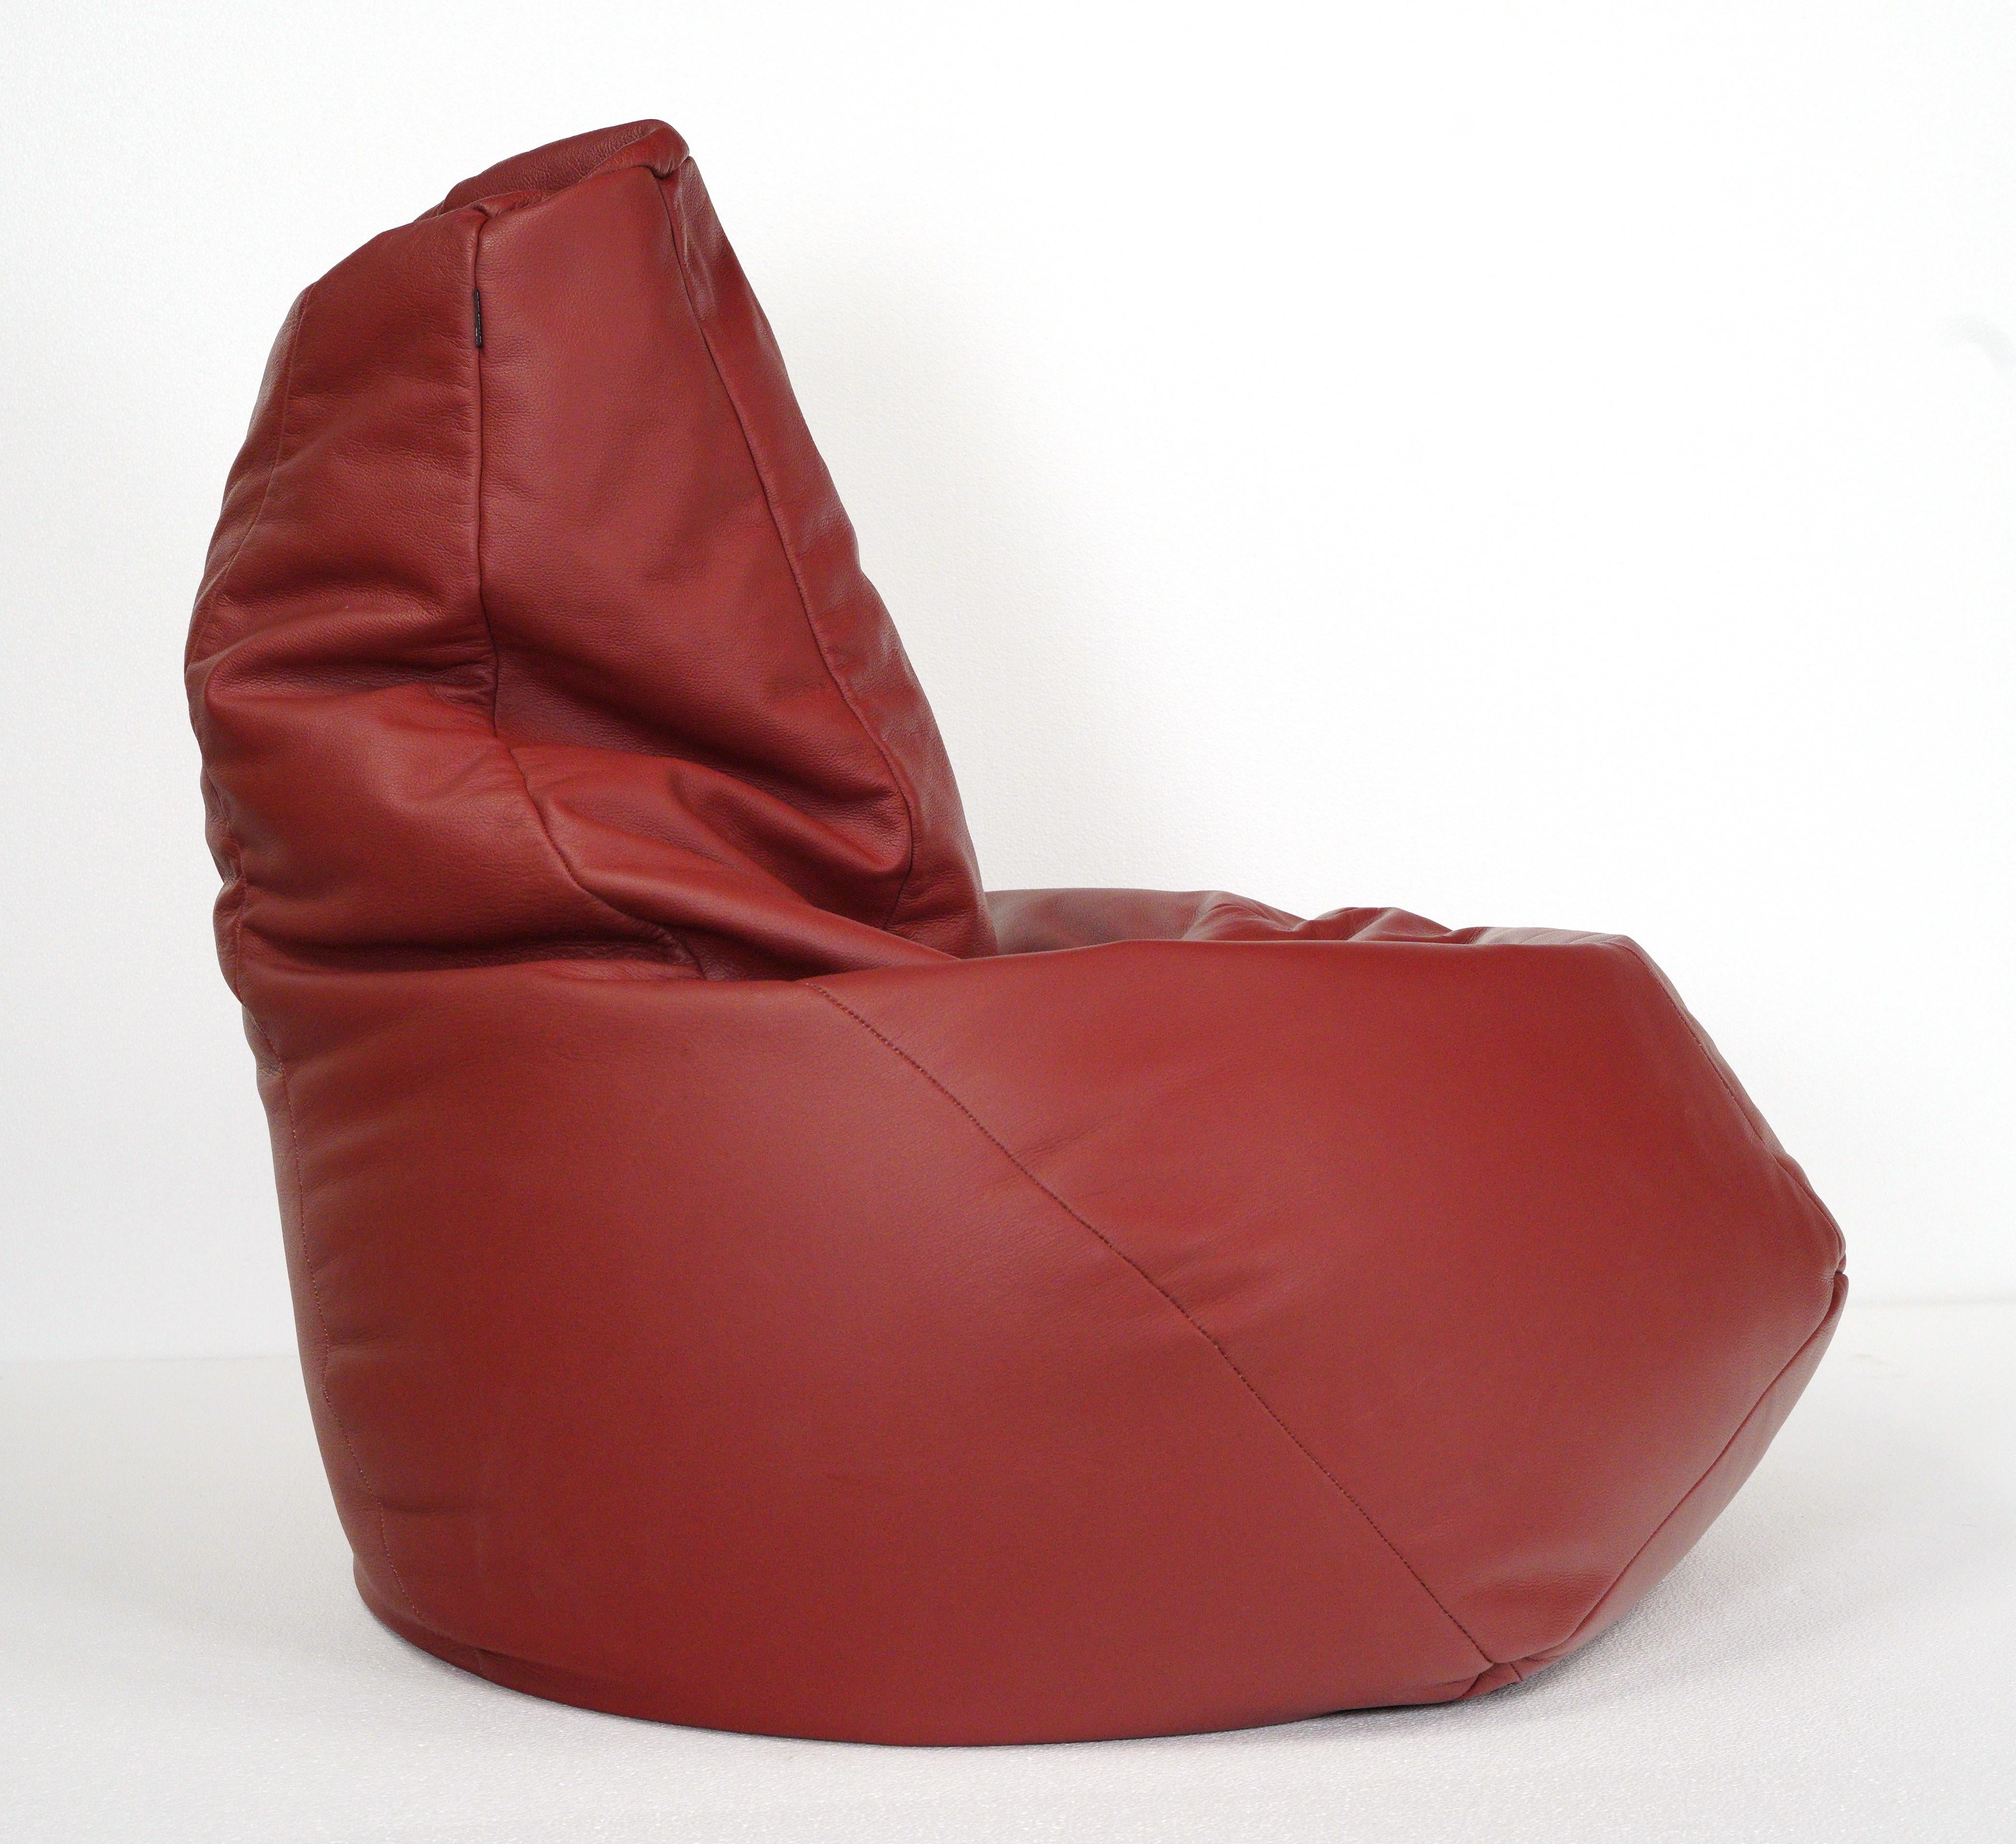 This Sacco bean bag chair is anatomically designed in red leather with polystyrene pellets, making it durable and comfortable. Made by Zanotta and designed by Gatti, Paolini, Teodoro. Good condition with surface wear from prior use with minor stains